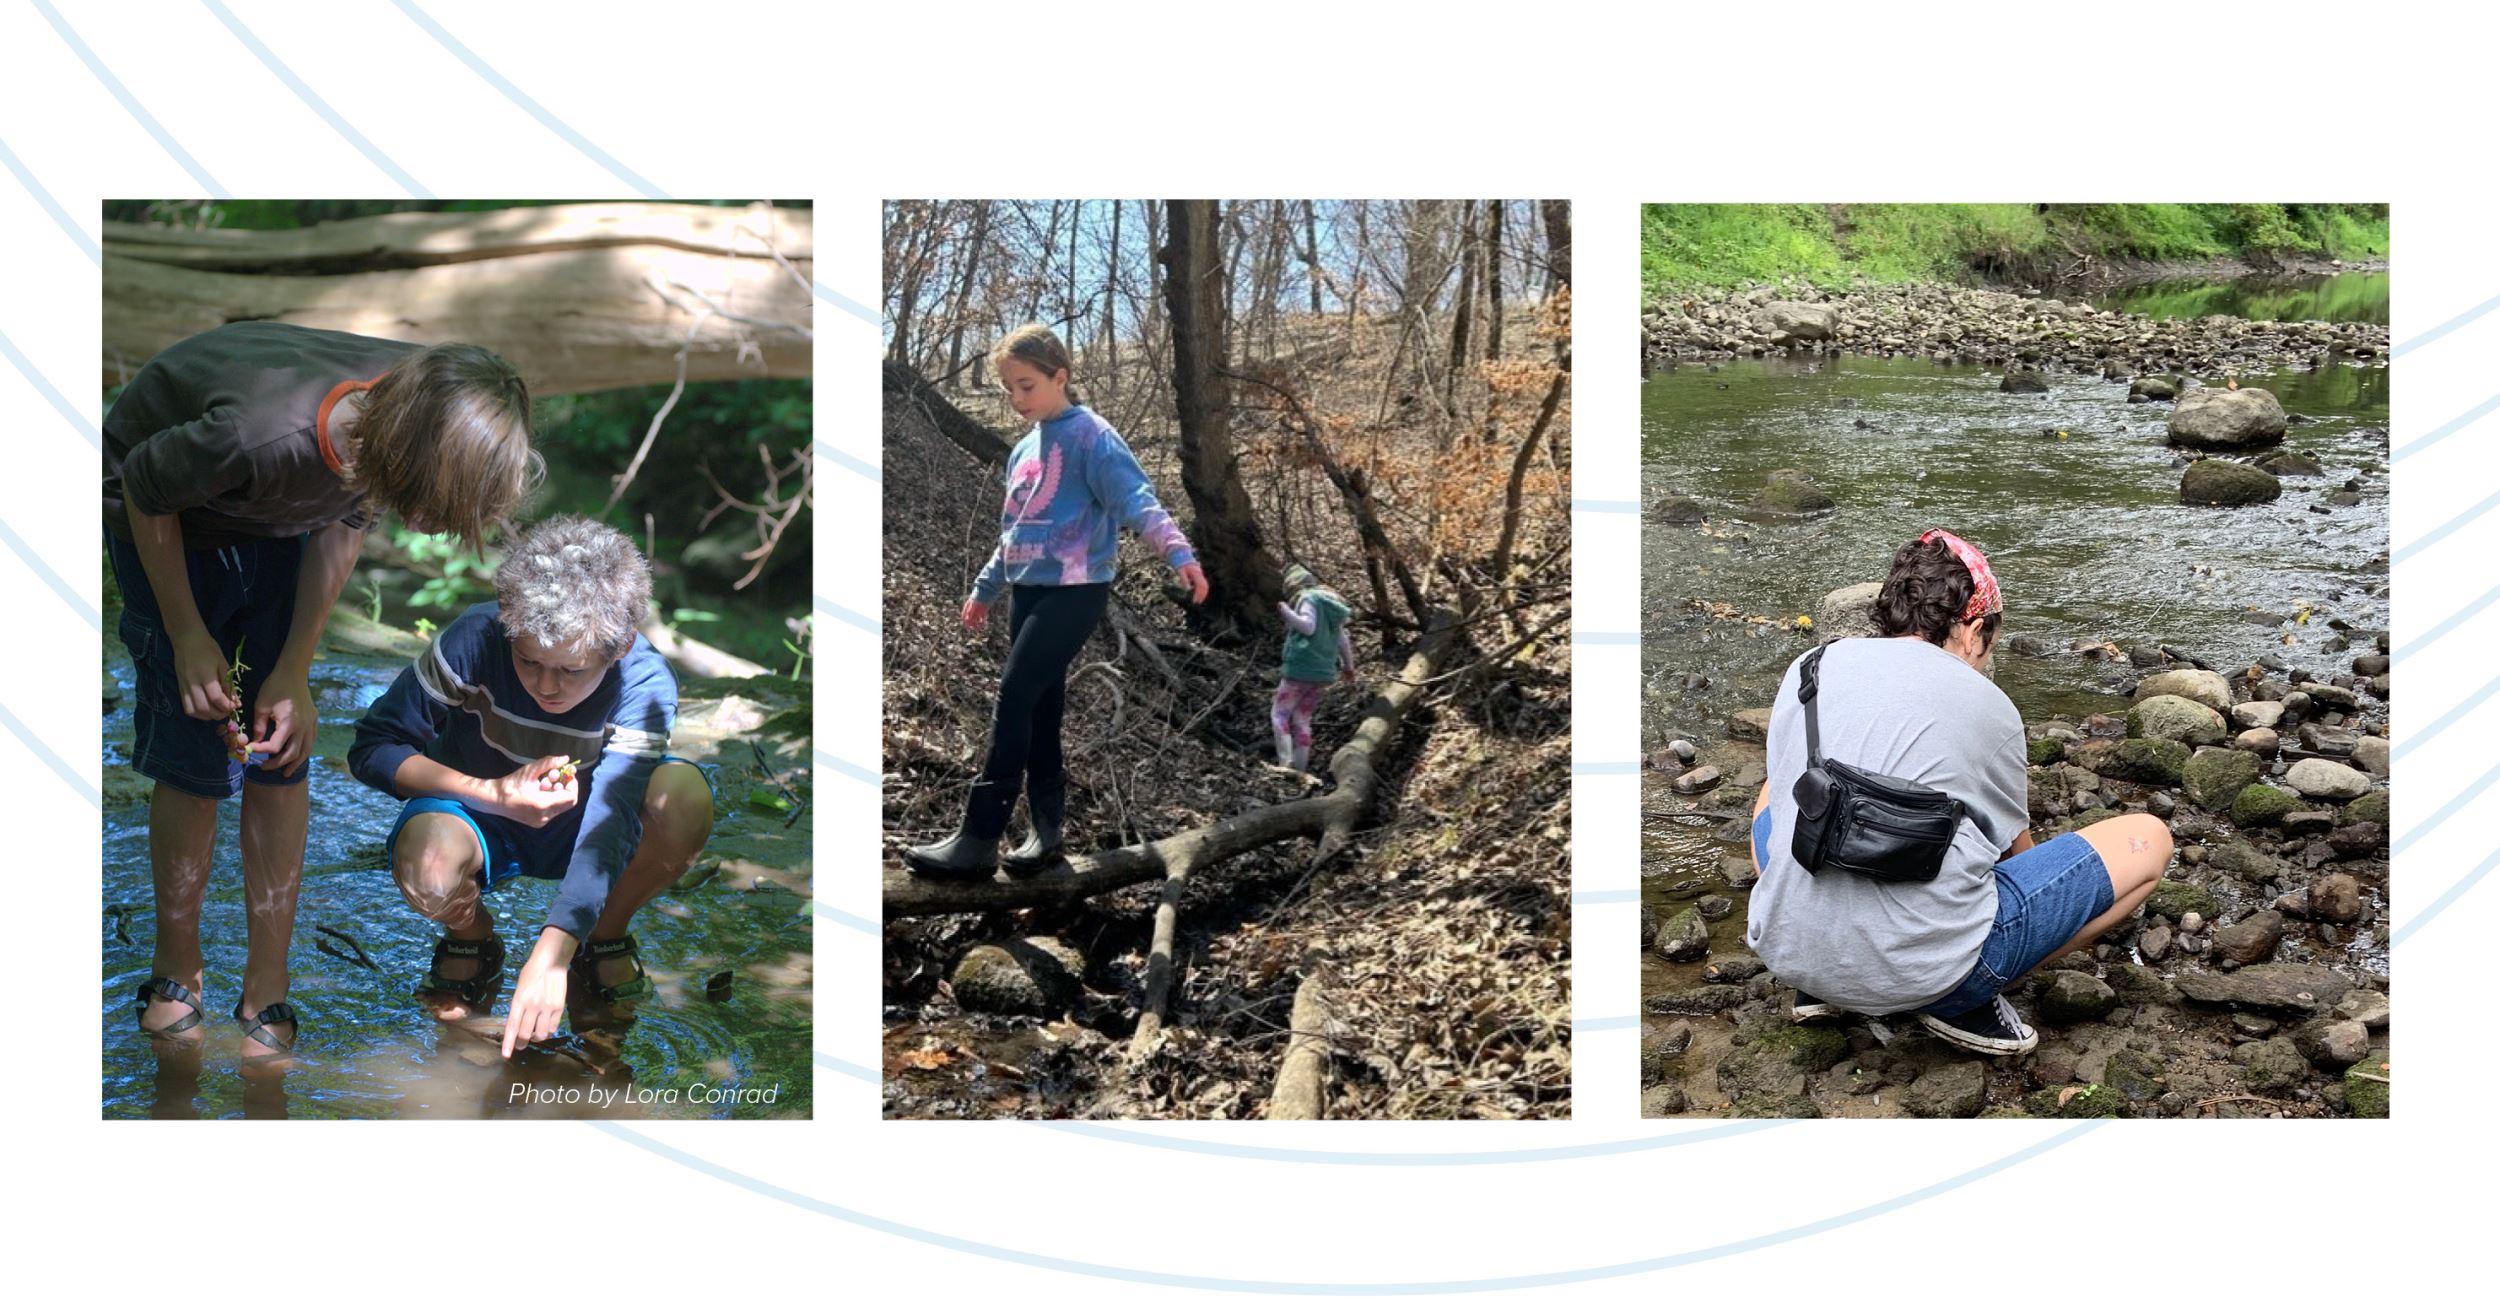 Three photos showing different youth exploring creeks.